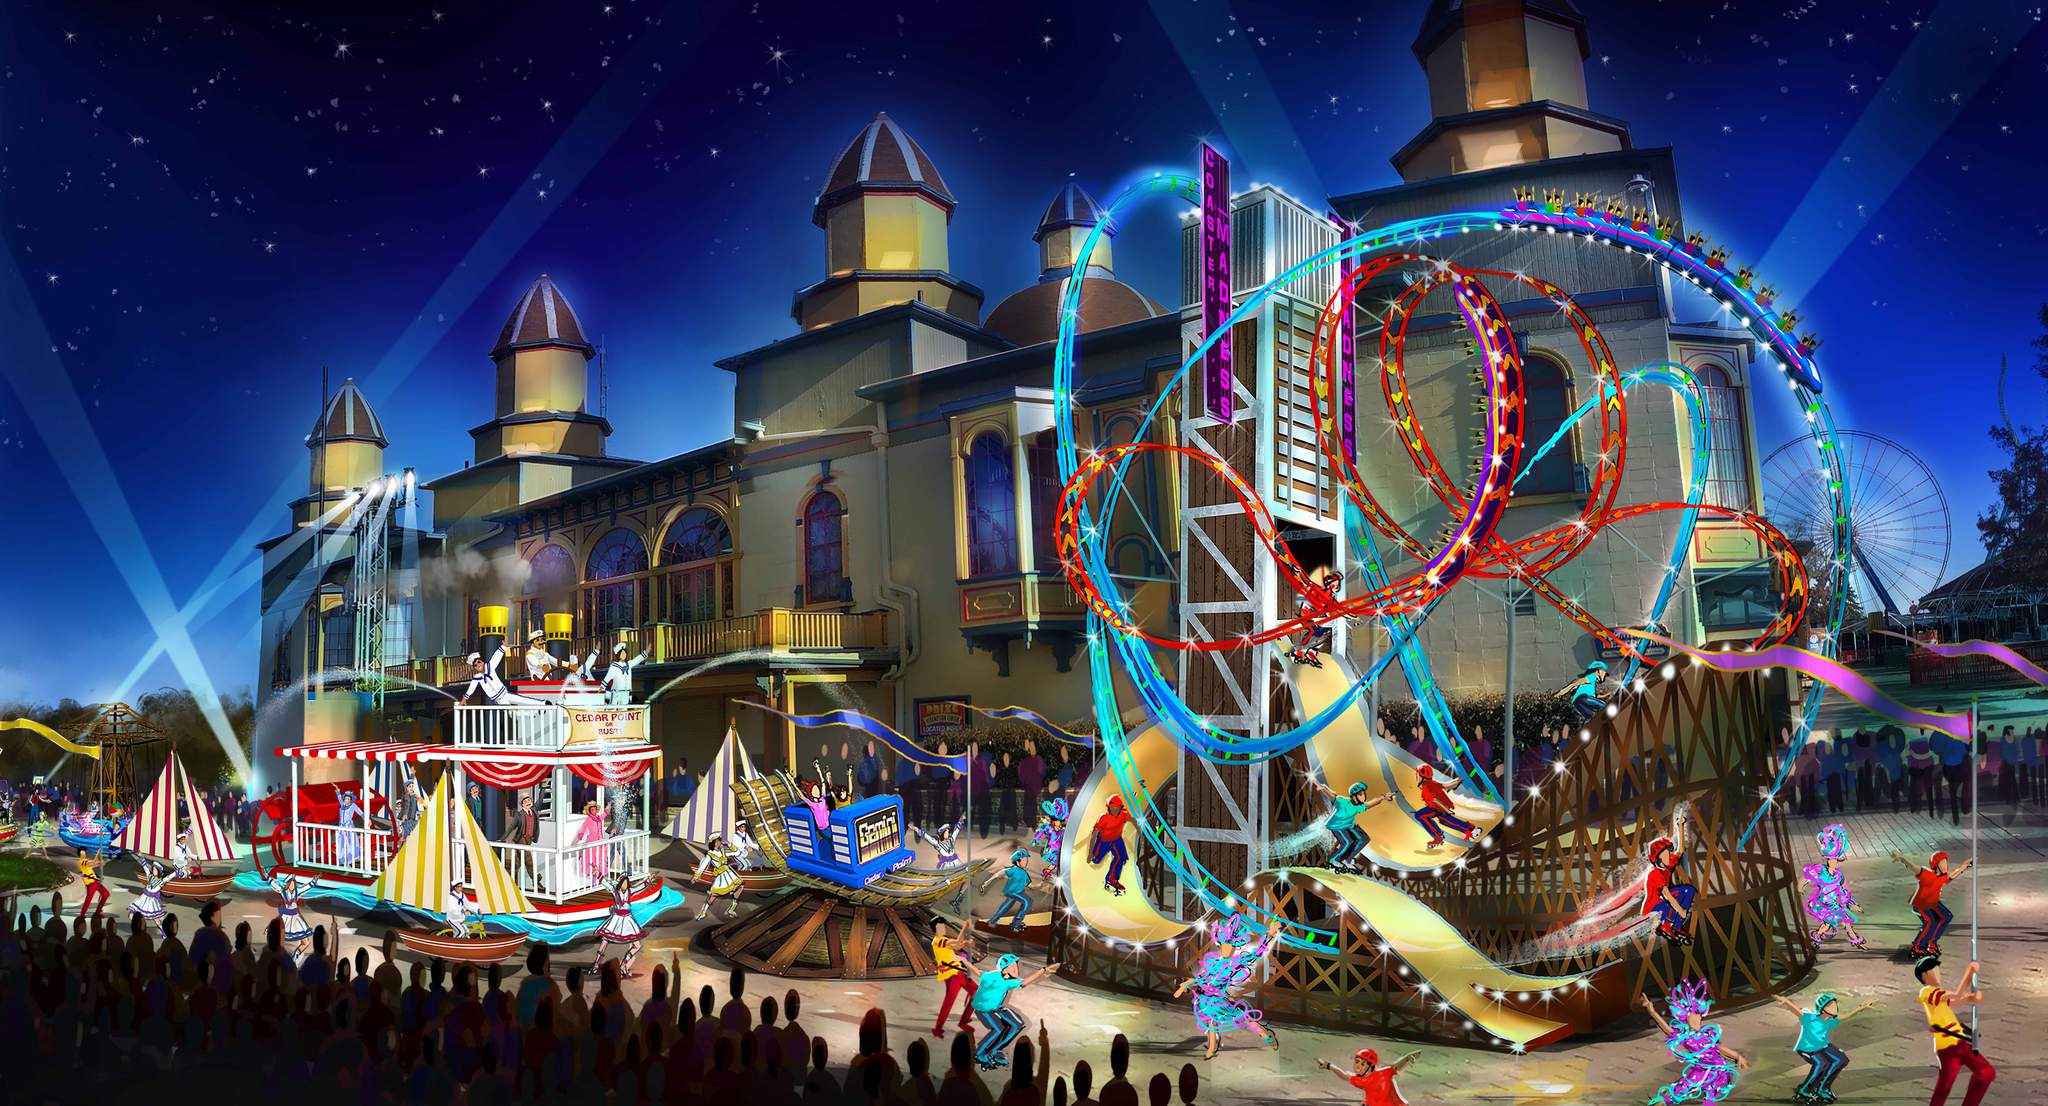 Cedar Point reveals plans for 150th anniversary What’s new in 2020